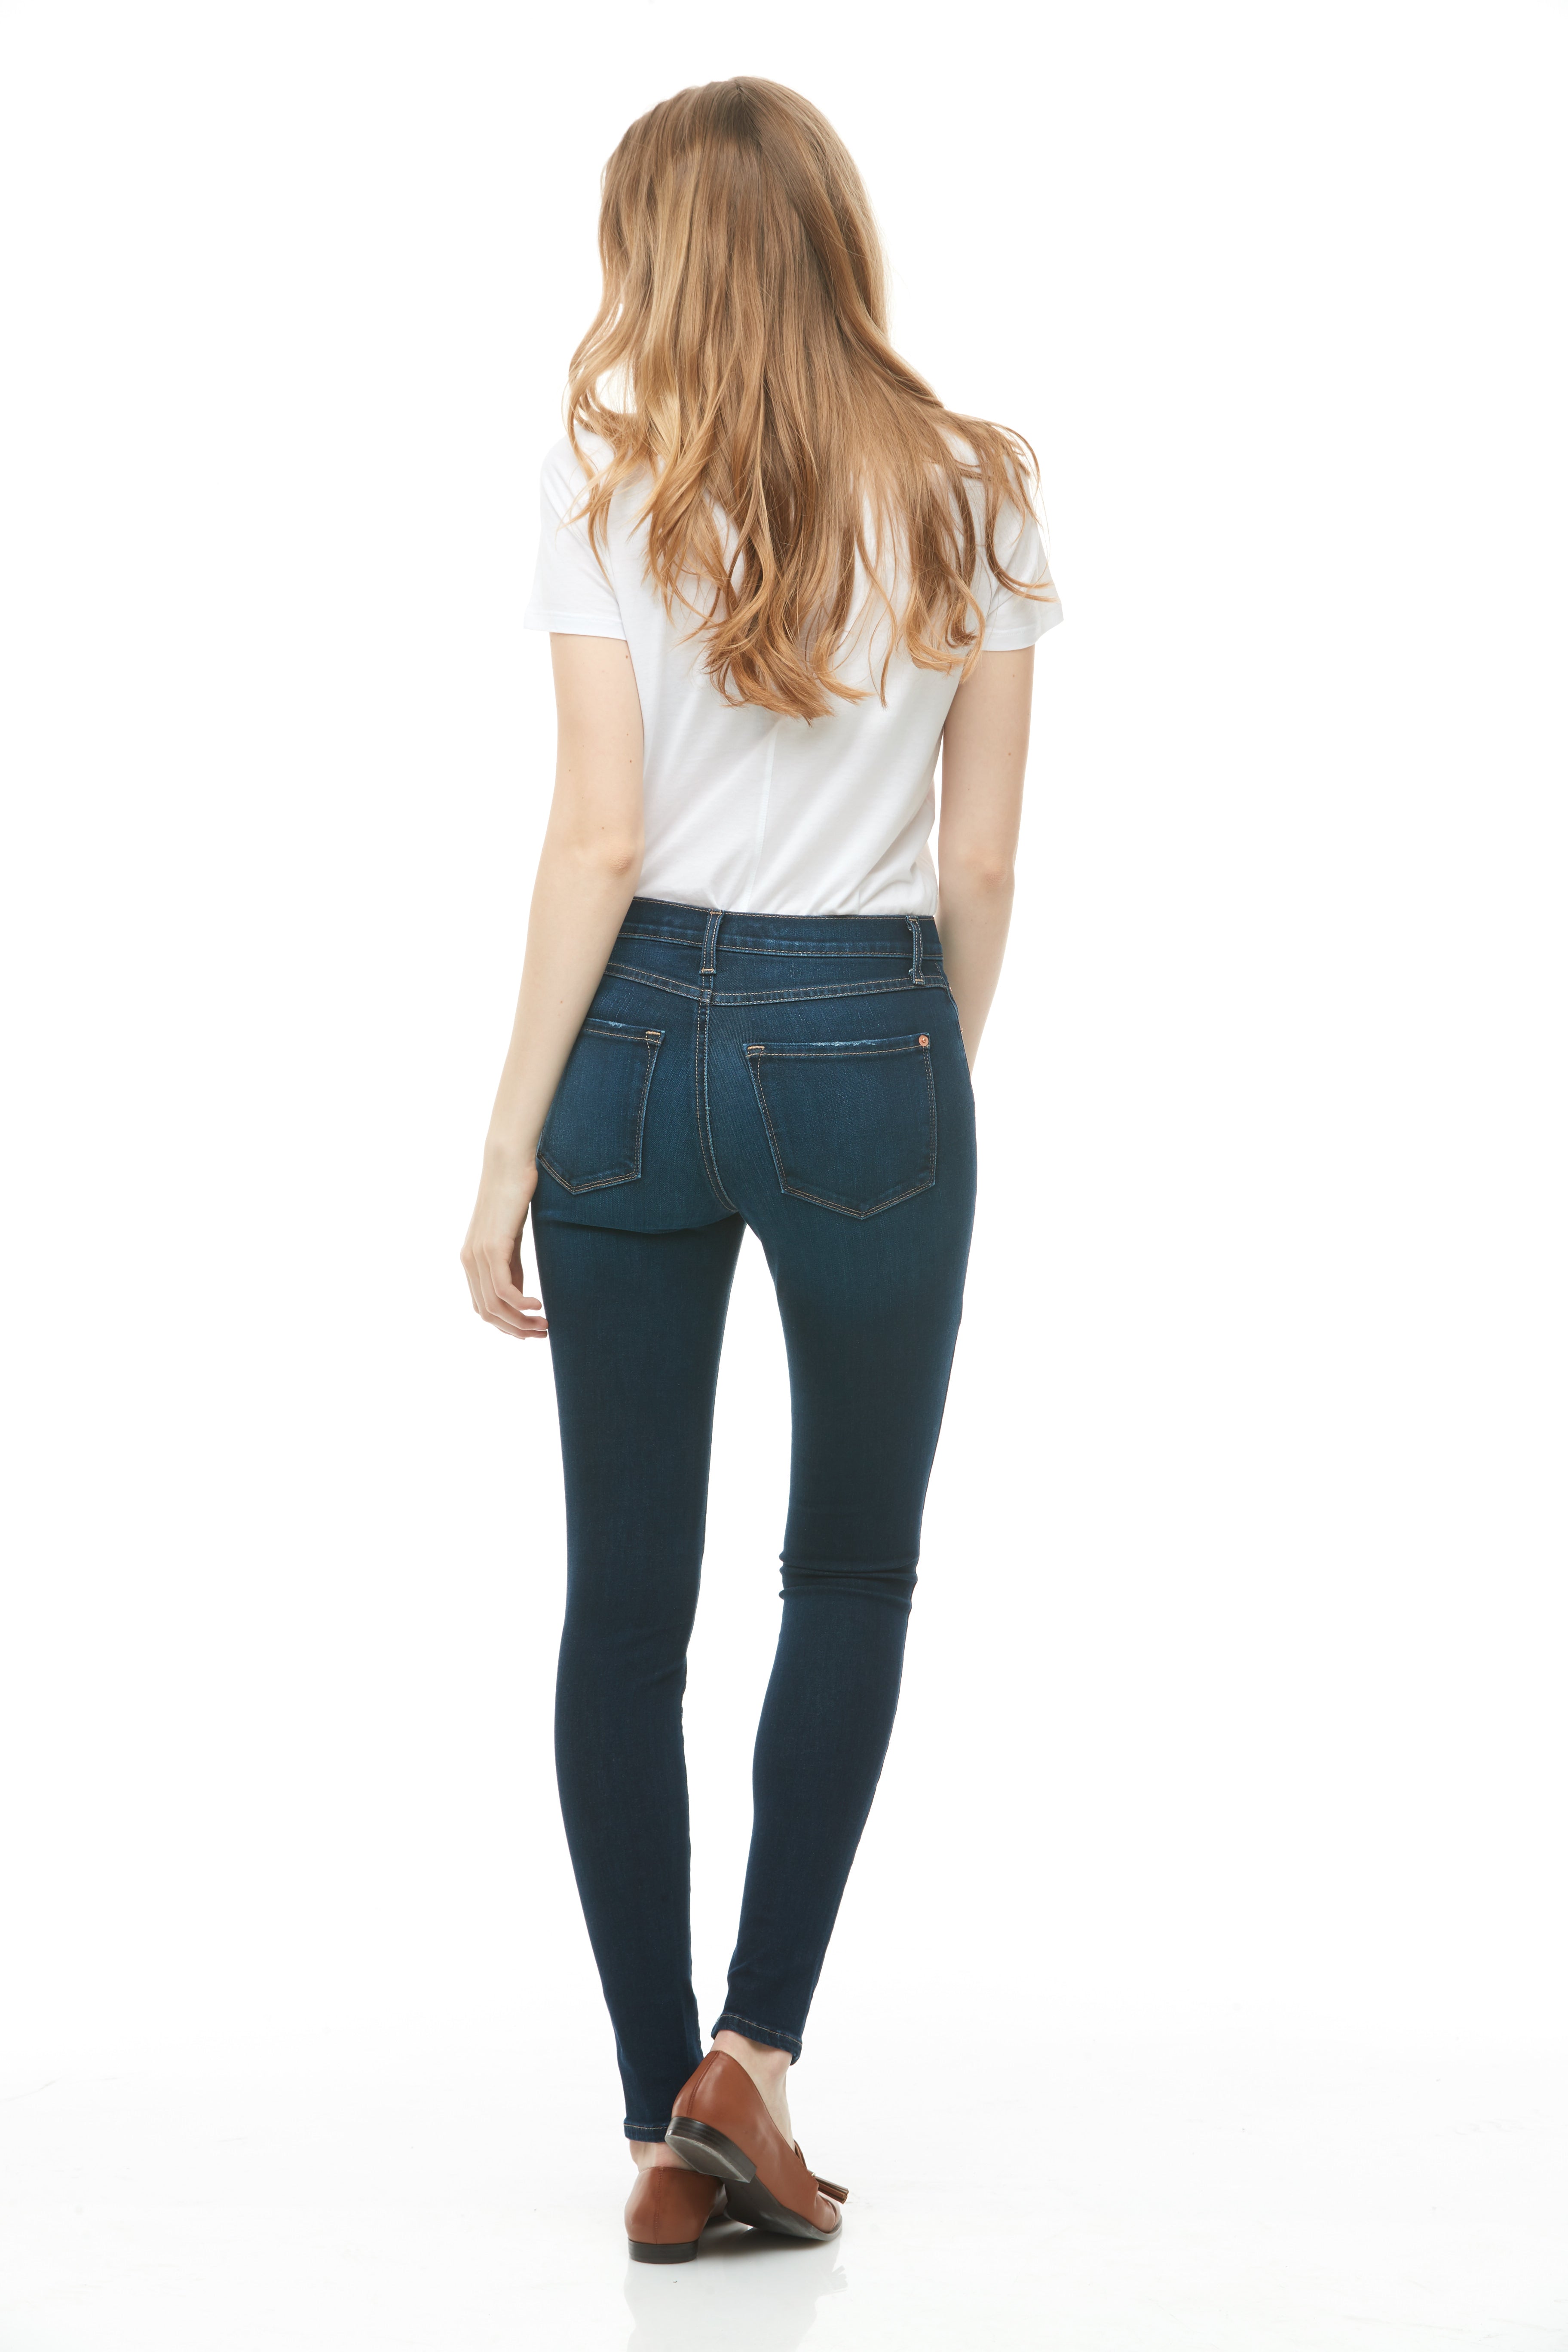 1951-R30 (Skinny jeans with 30 inch inseam)  Super fit!